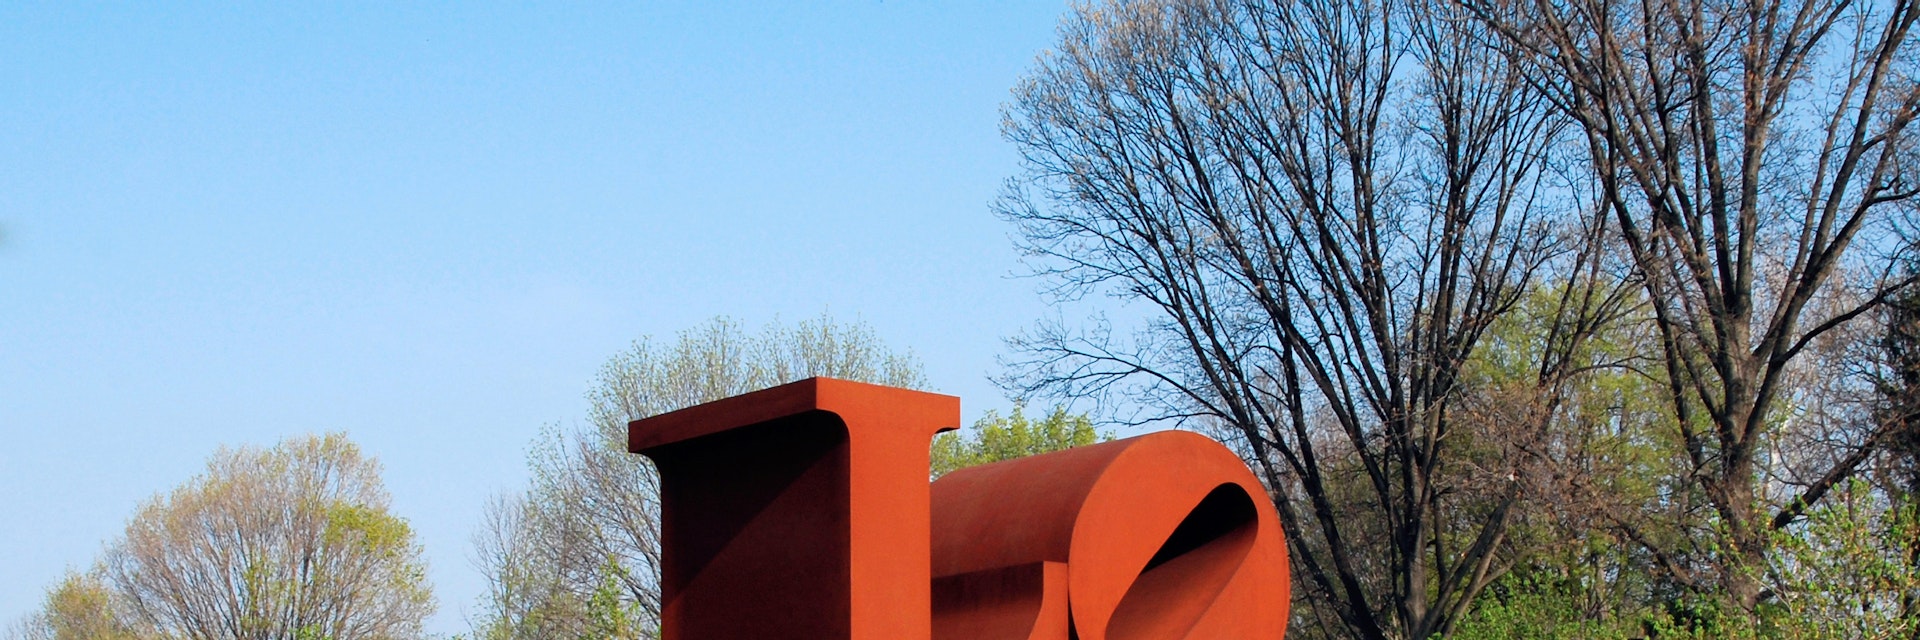 Love by American artist Robert Indiana, 1970. Gift of the Friends of the Indianapolis Museum of Art in memory of Henry F. DeBoest. Restoration was made possible by Patricia J. and James E. LaCrosse. (Photo by Indianapolis Museum of Art/Getty Images)